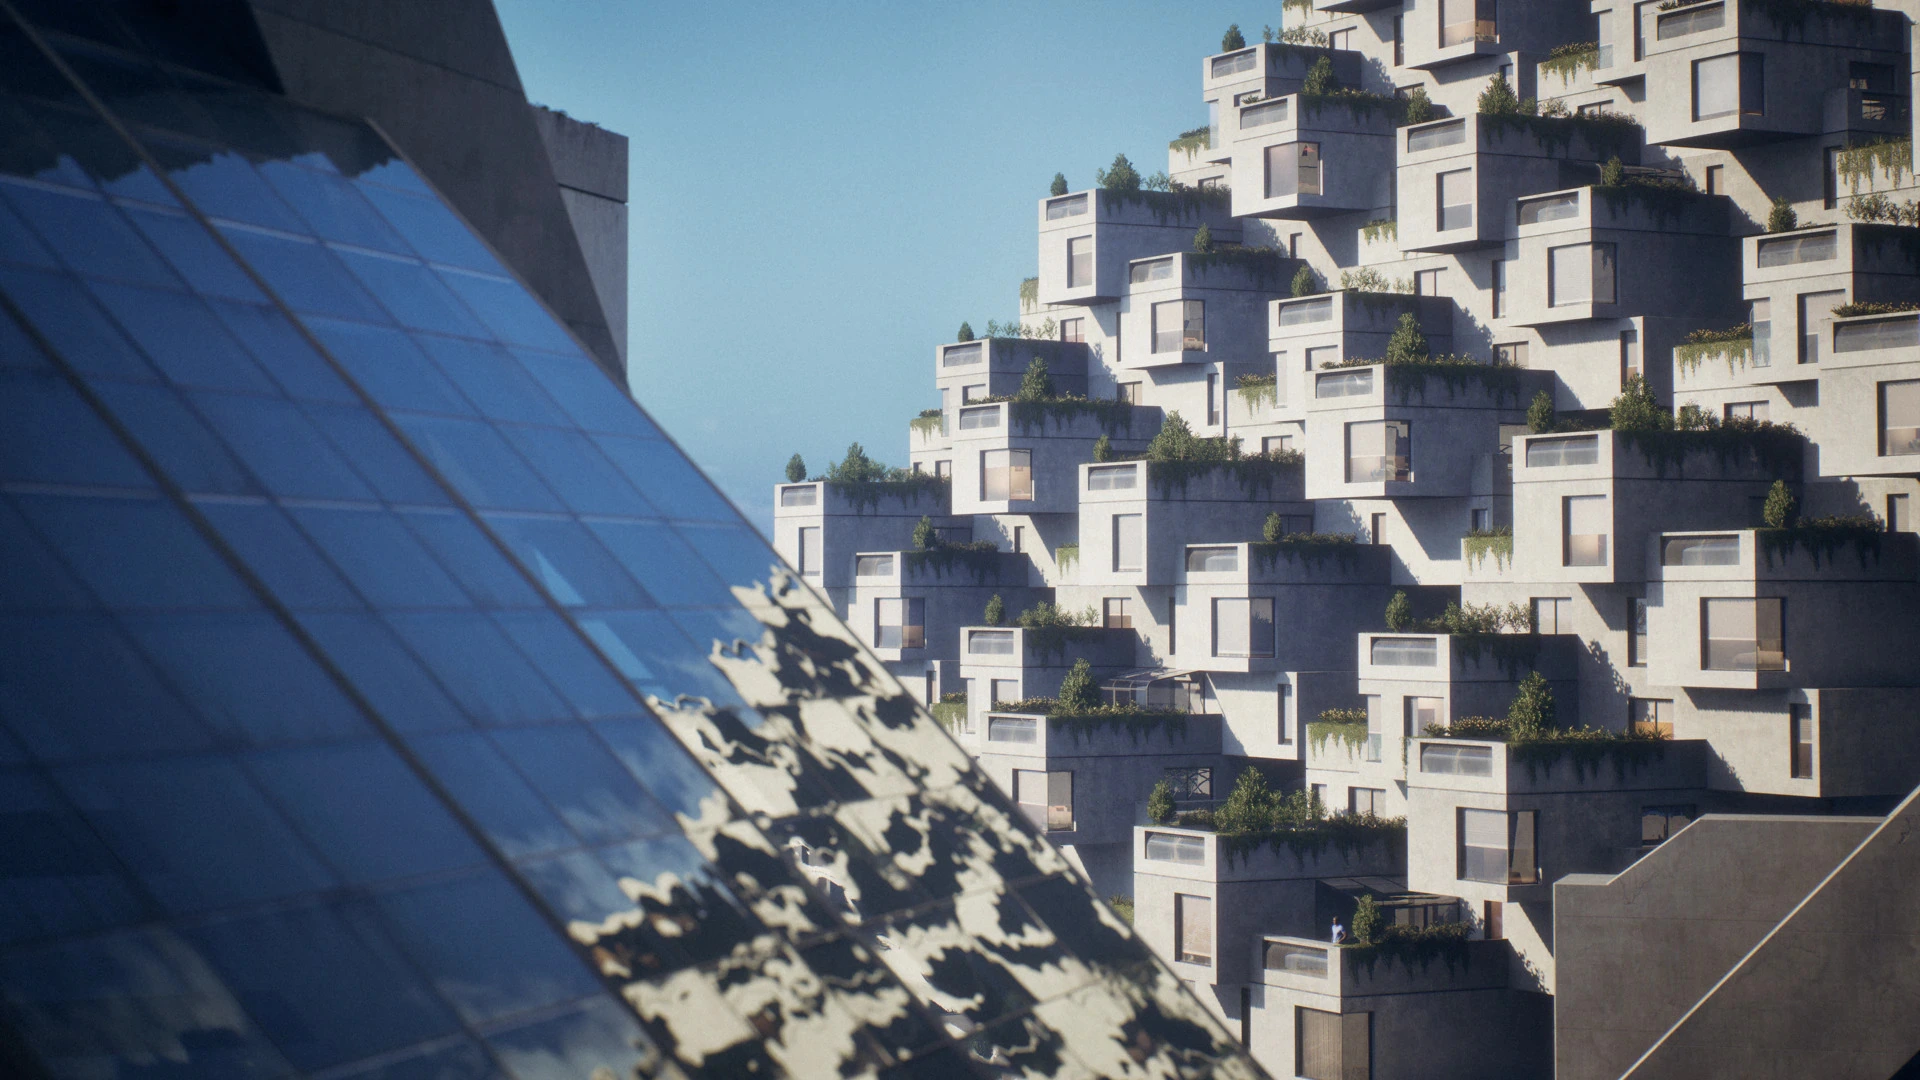 Screenshot of an architectural visualisation scene rendered with Unreal Engine 5